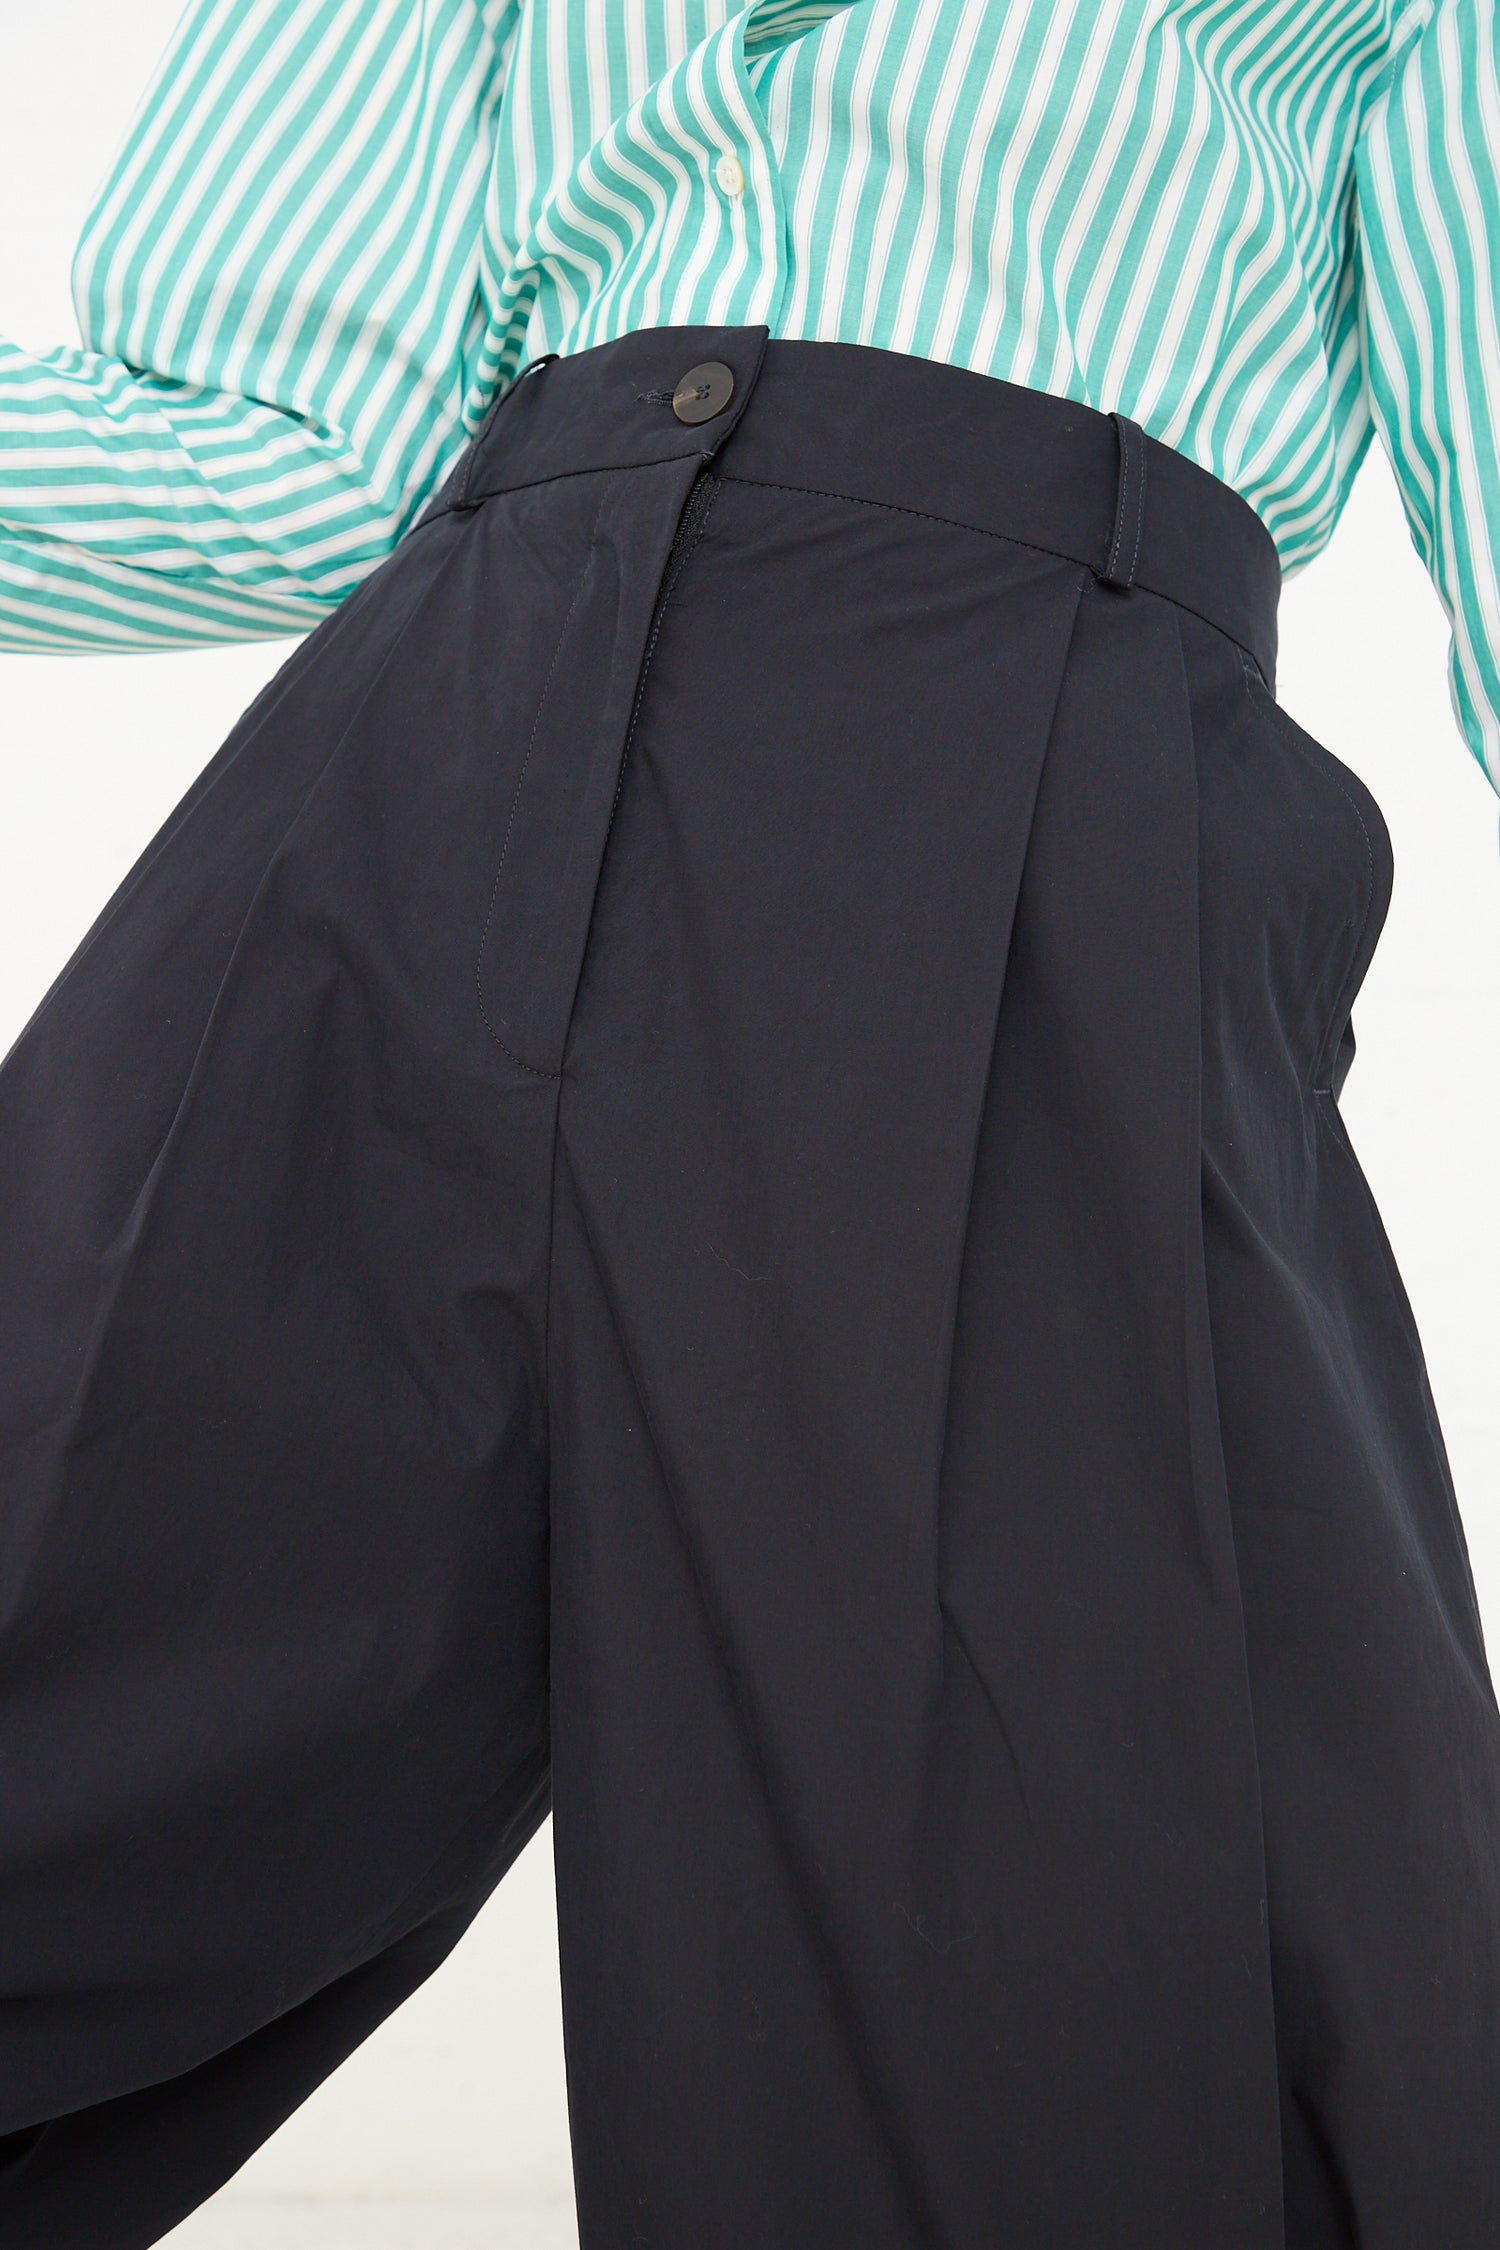 A close-up photo focusing on a person's midsection, featuring a green and white striped cotton shirt tucked into Studio Nicholson's Acuna Double Pleat Front Pant in Darkest Navy with a single visible button.